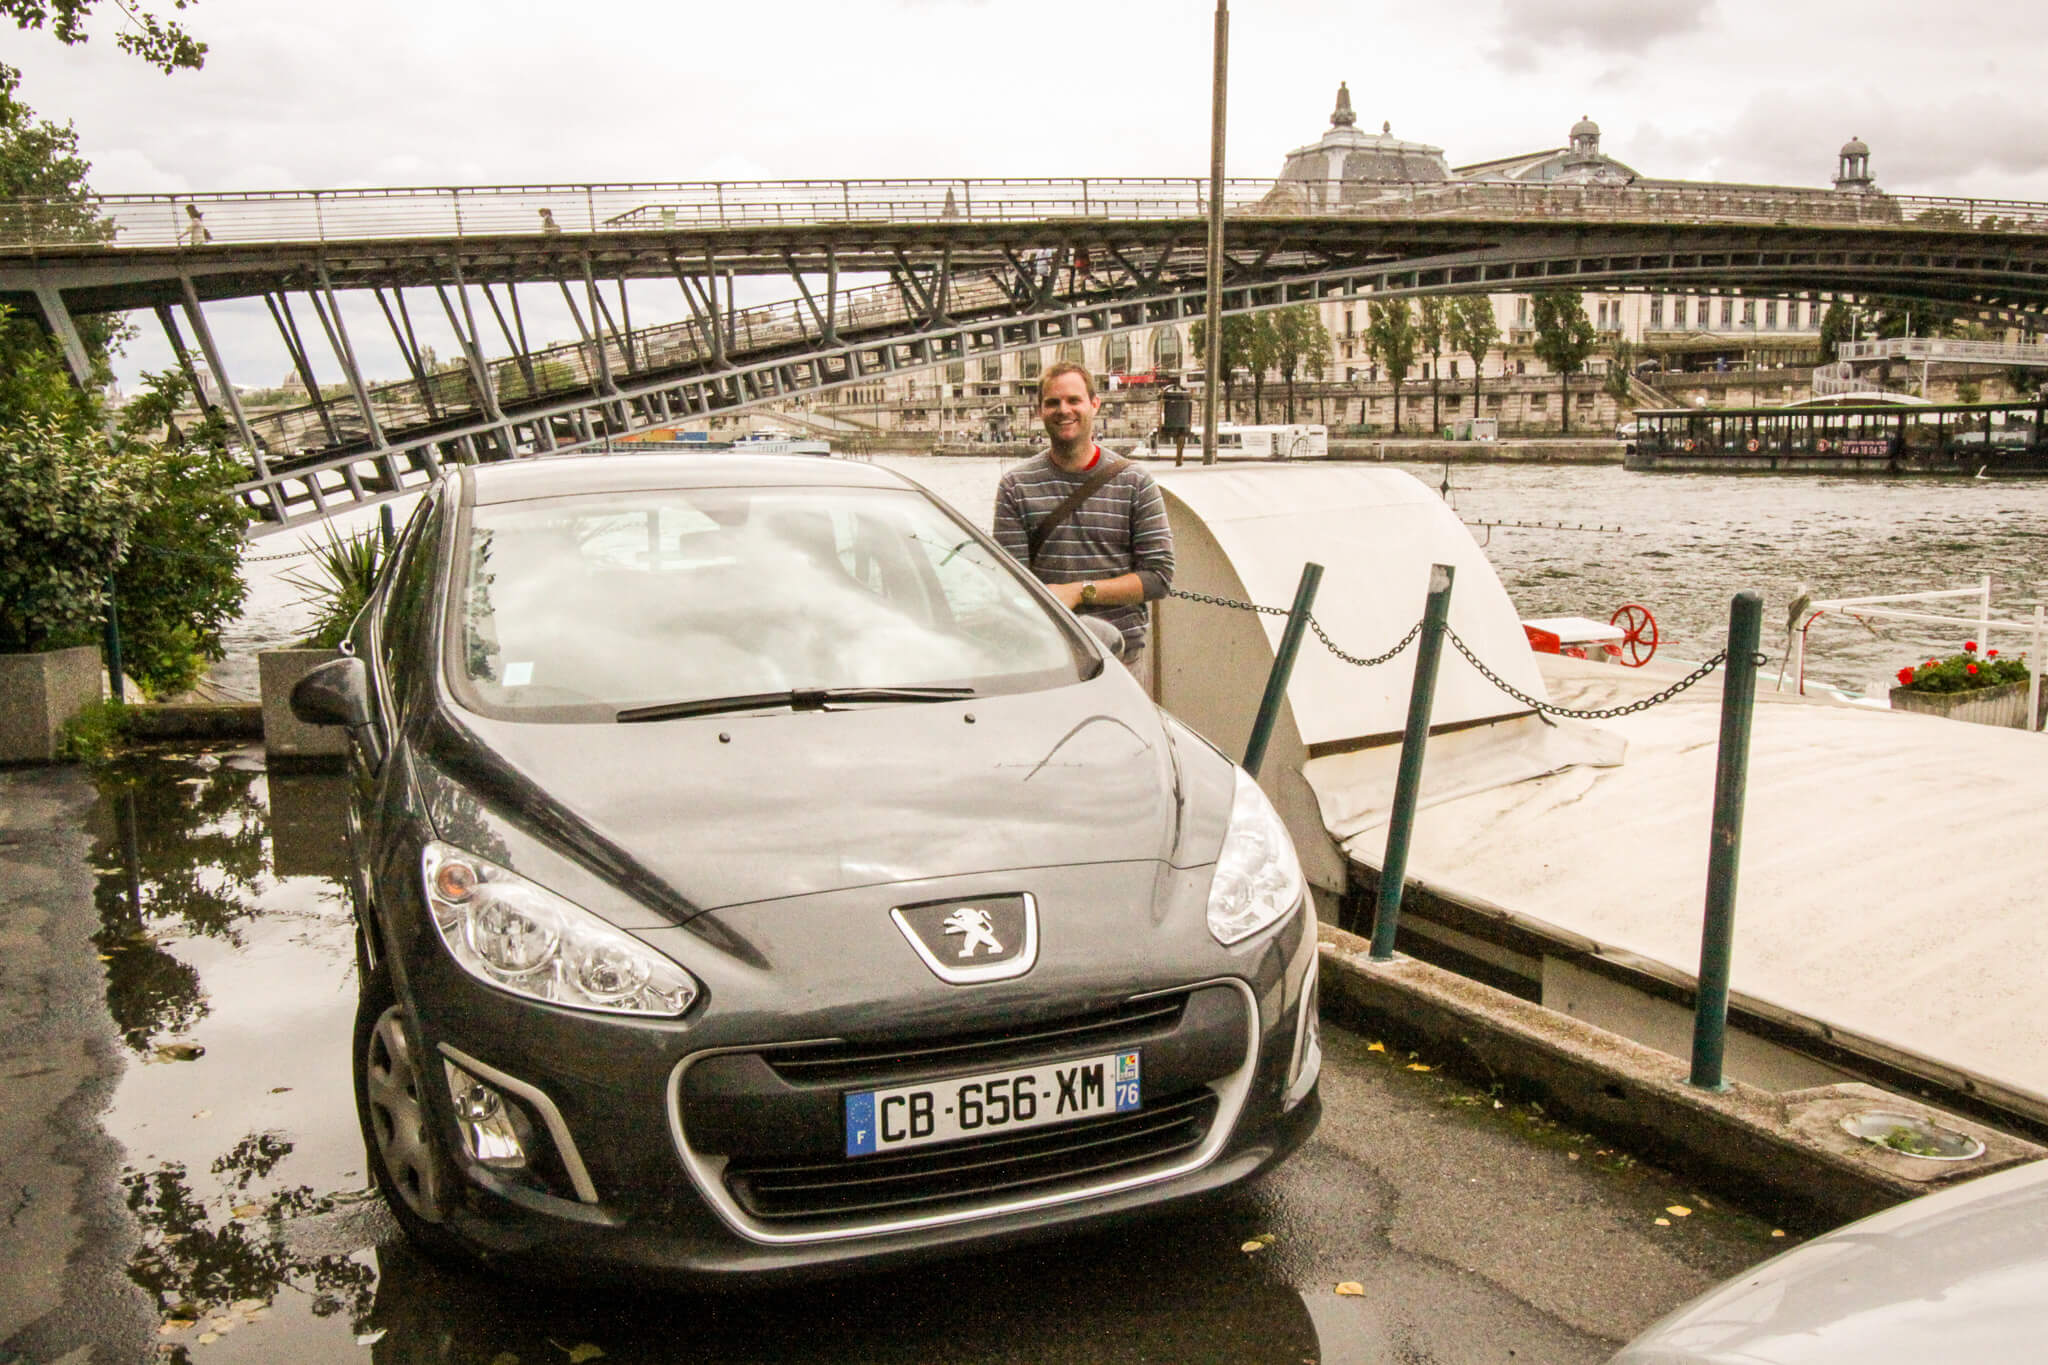 Bringing our rental car down to our houseboat on the Seine River in Paris